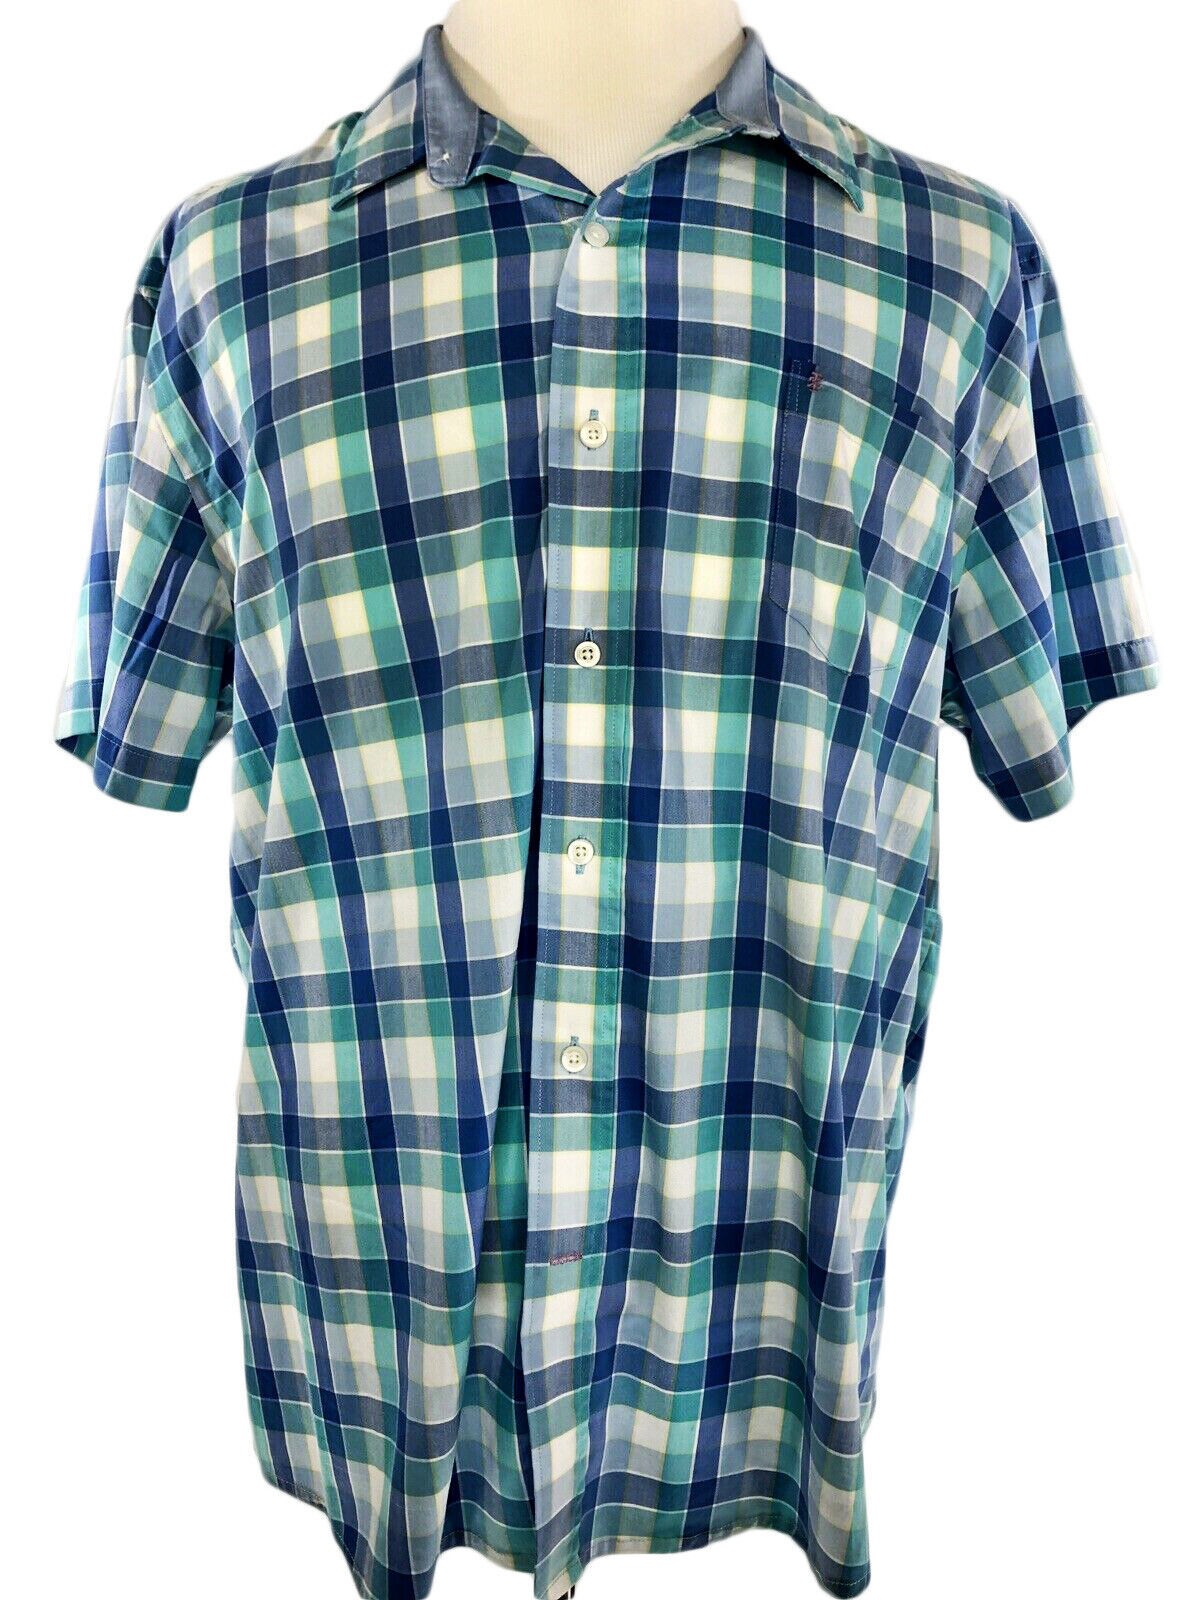 Primary image for IZOD Men's Shirt Short Sleeve Button Down Collar Pastel Blue Plaid Size XXL $45